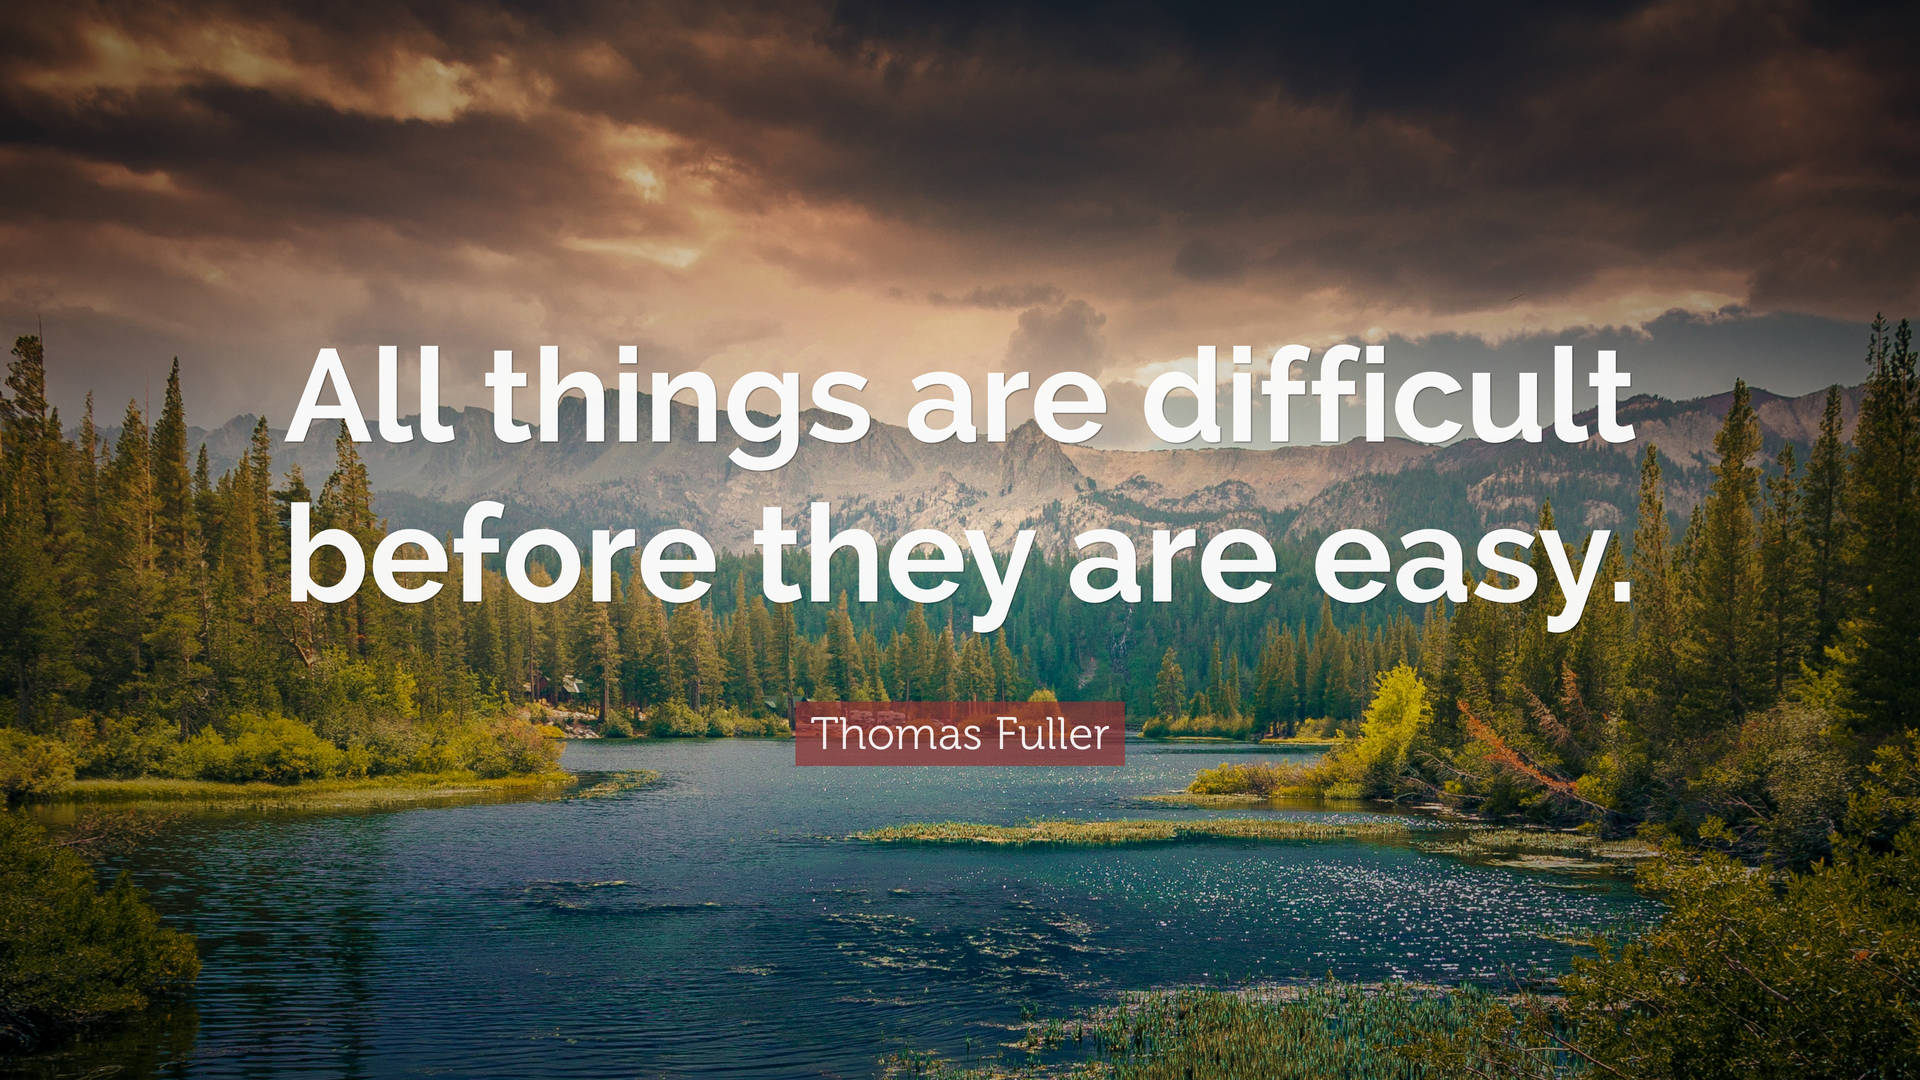 Thomas Fuller Positive Quotes